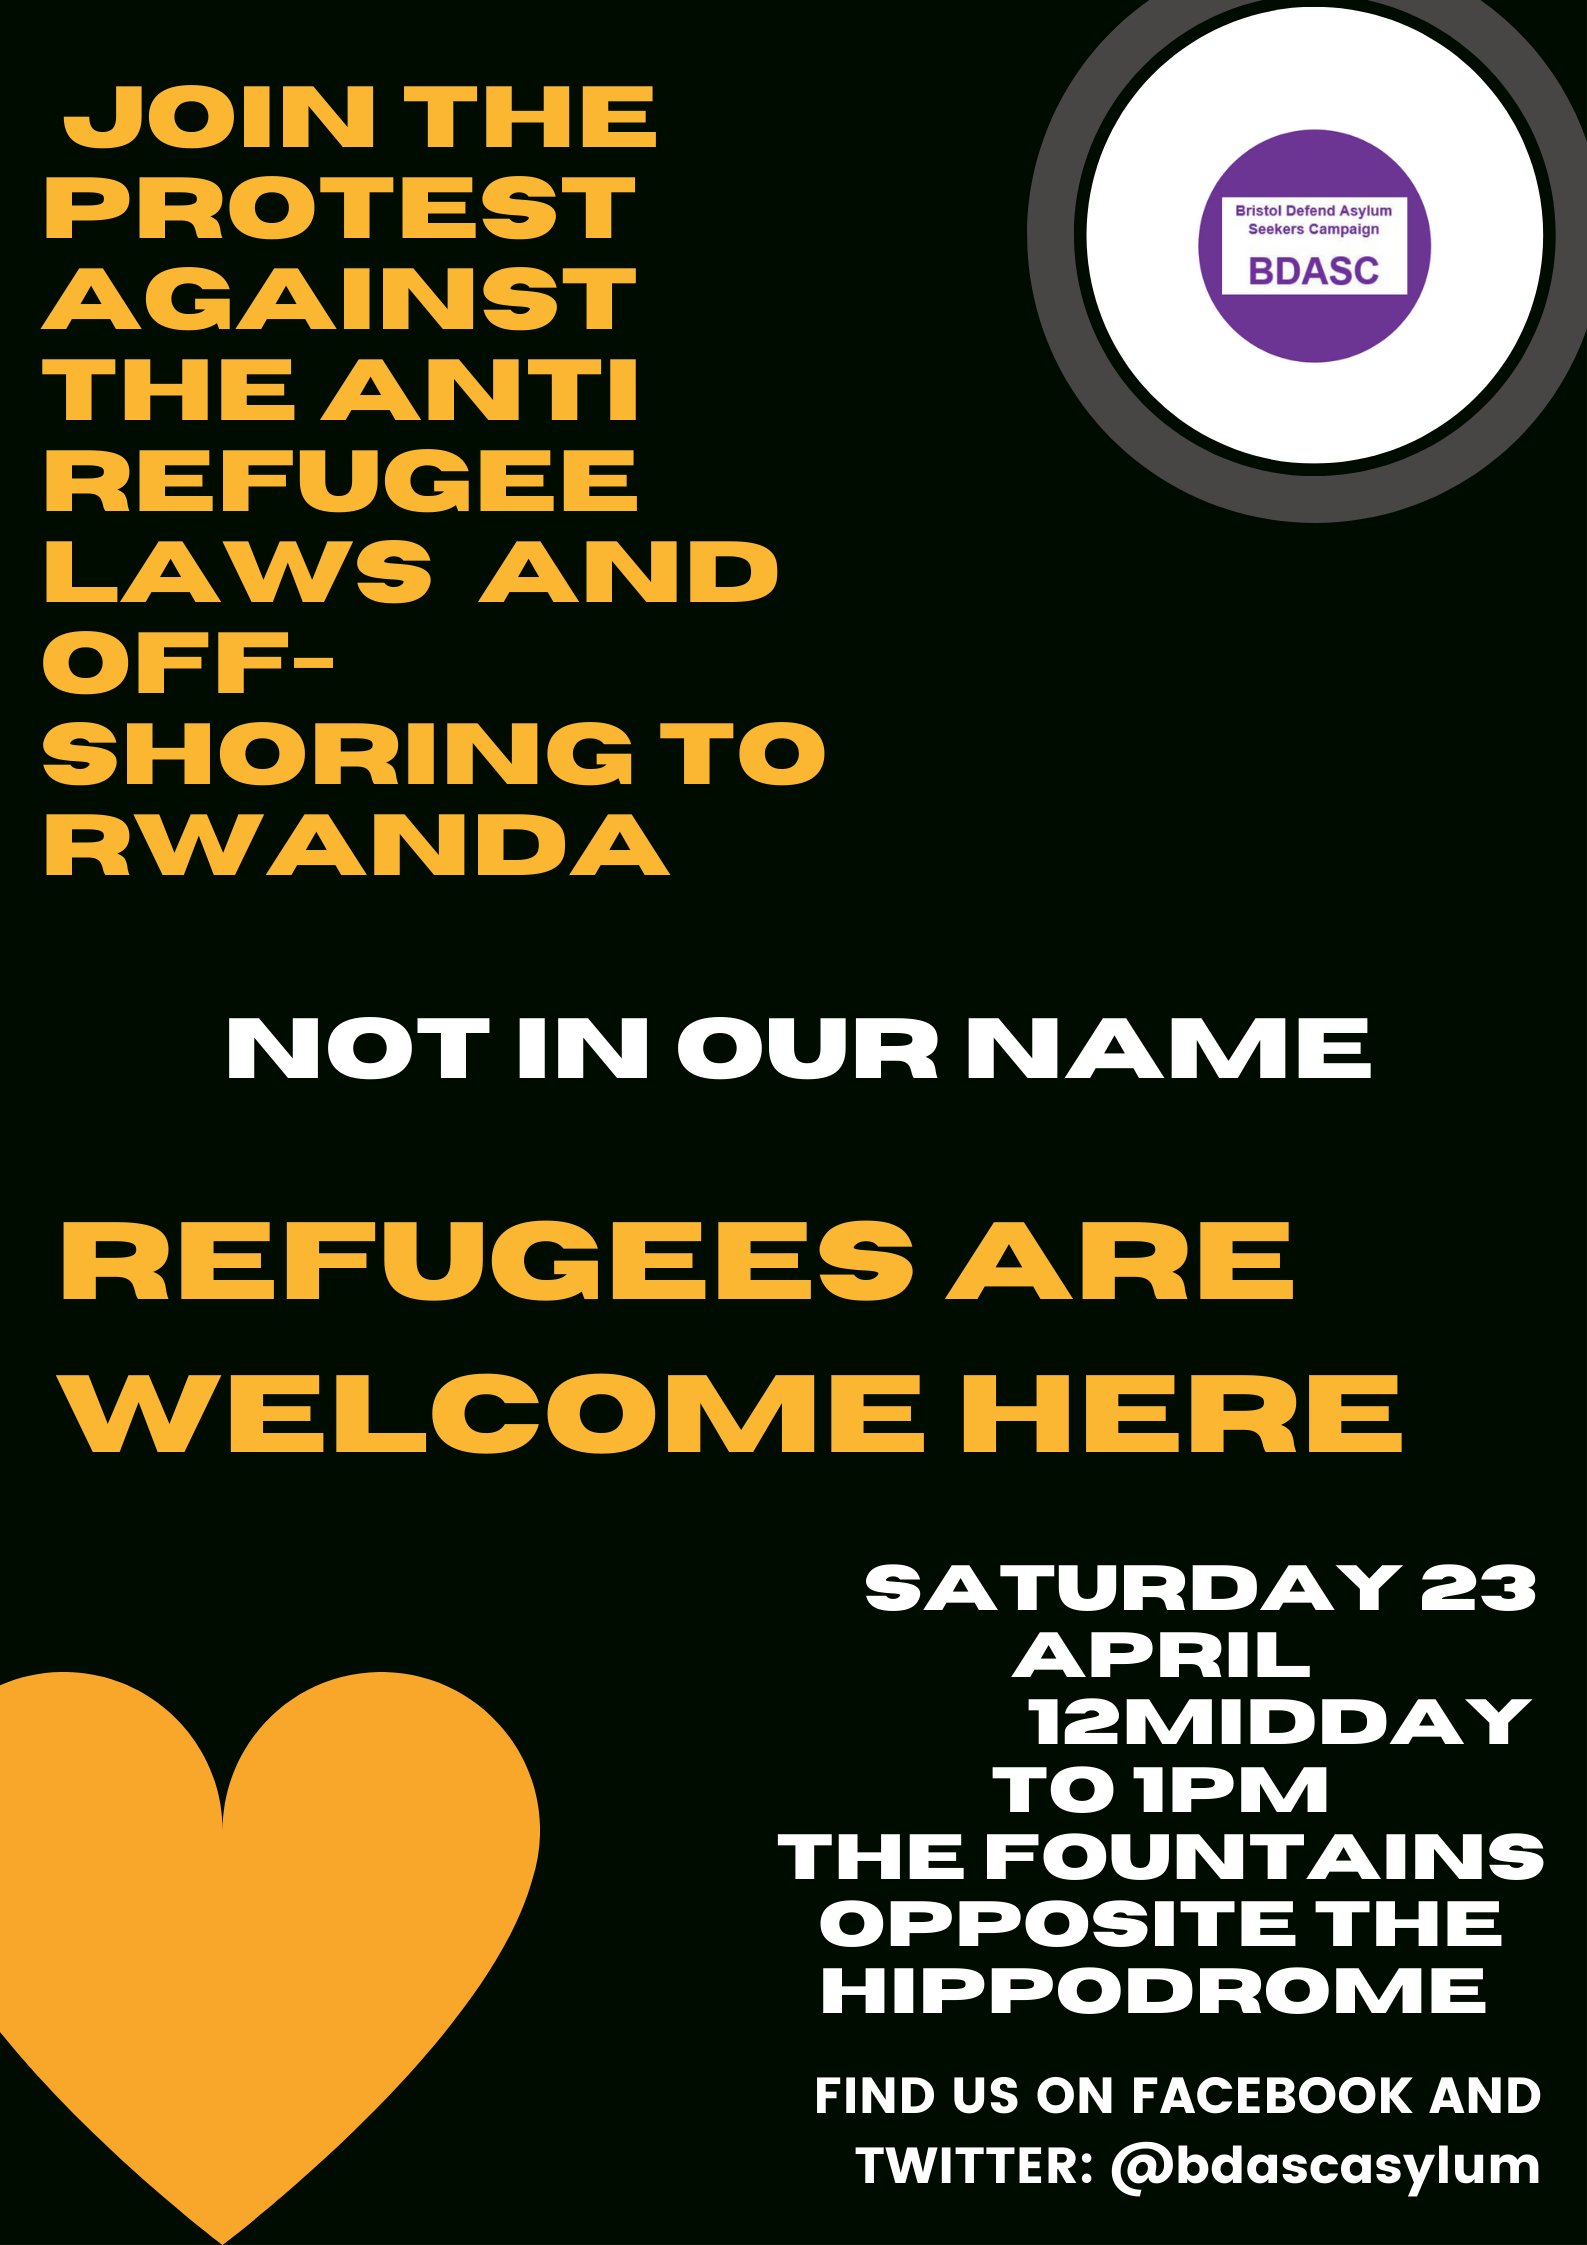 A poster says "Join the protest against the ant-refugee laws and off-shoring to Rwanda."